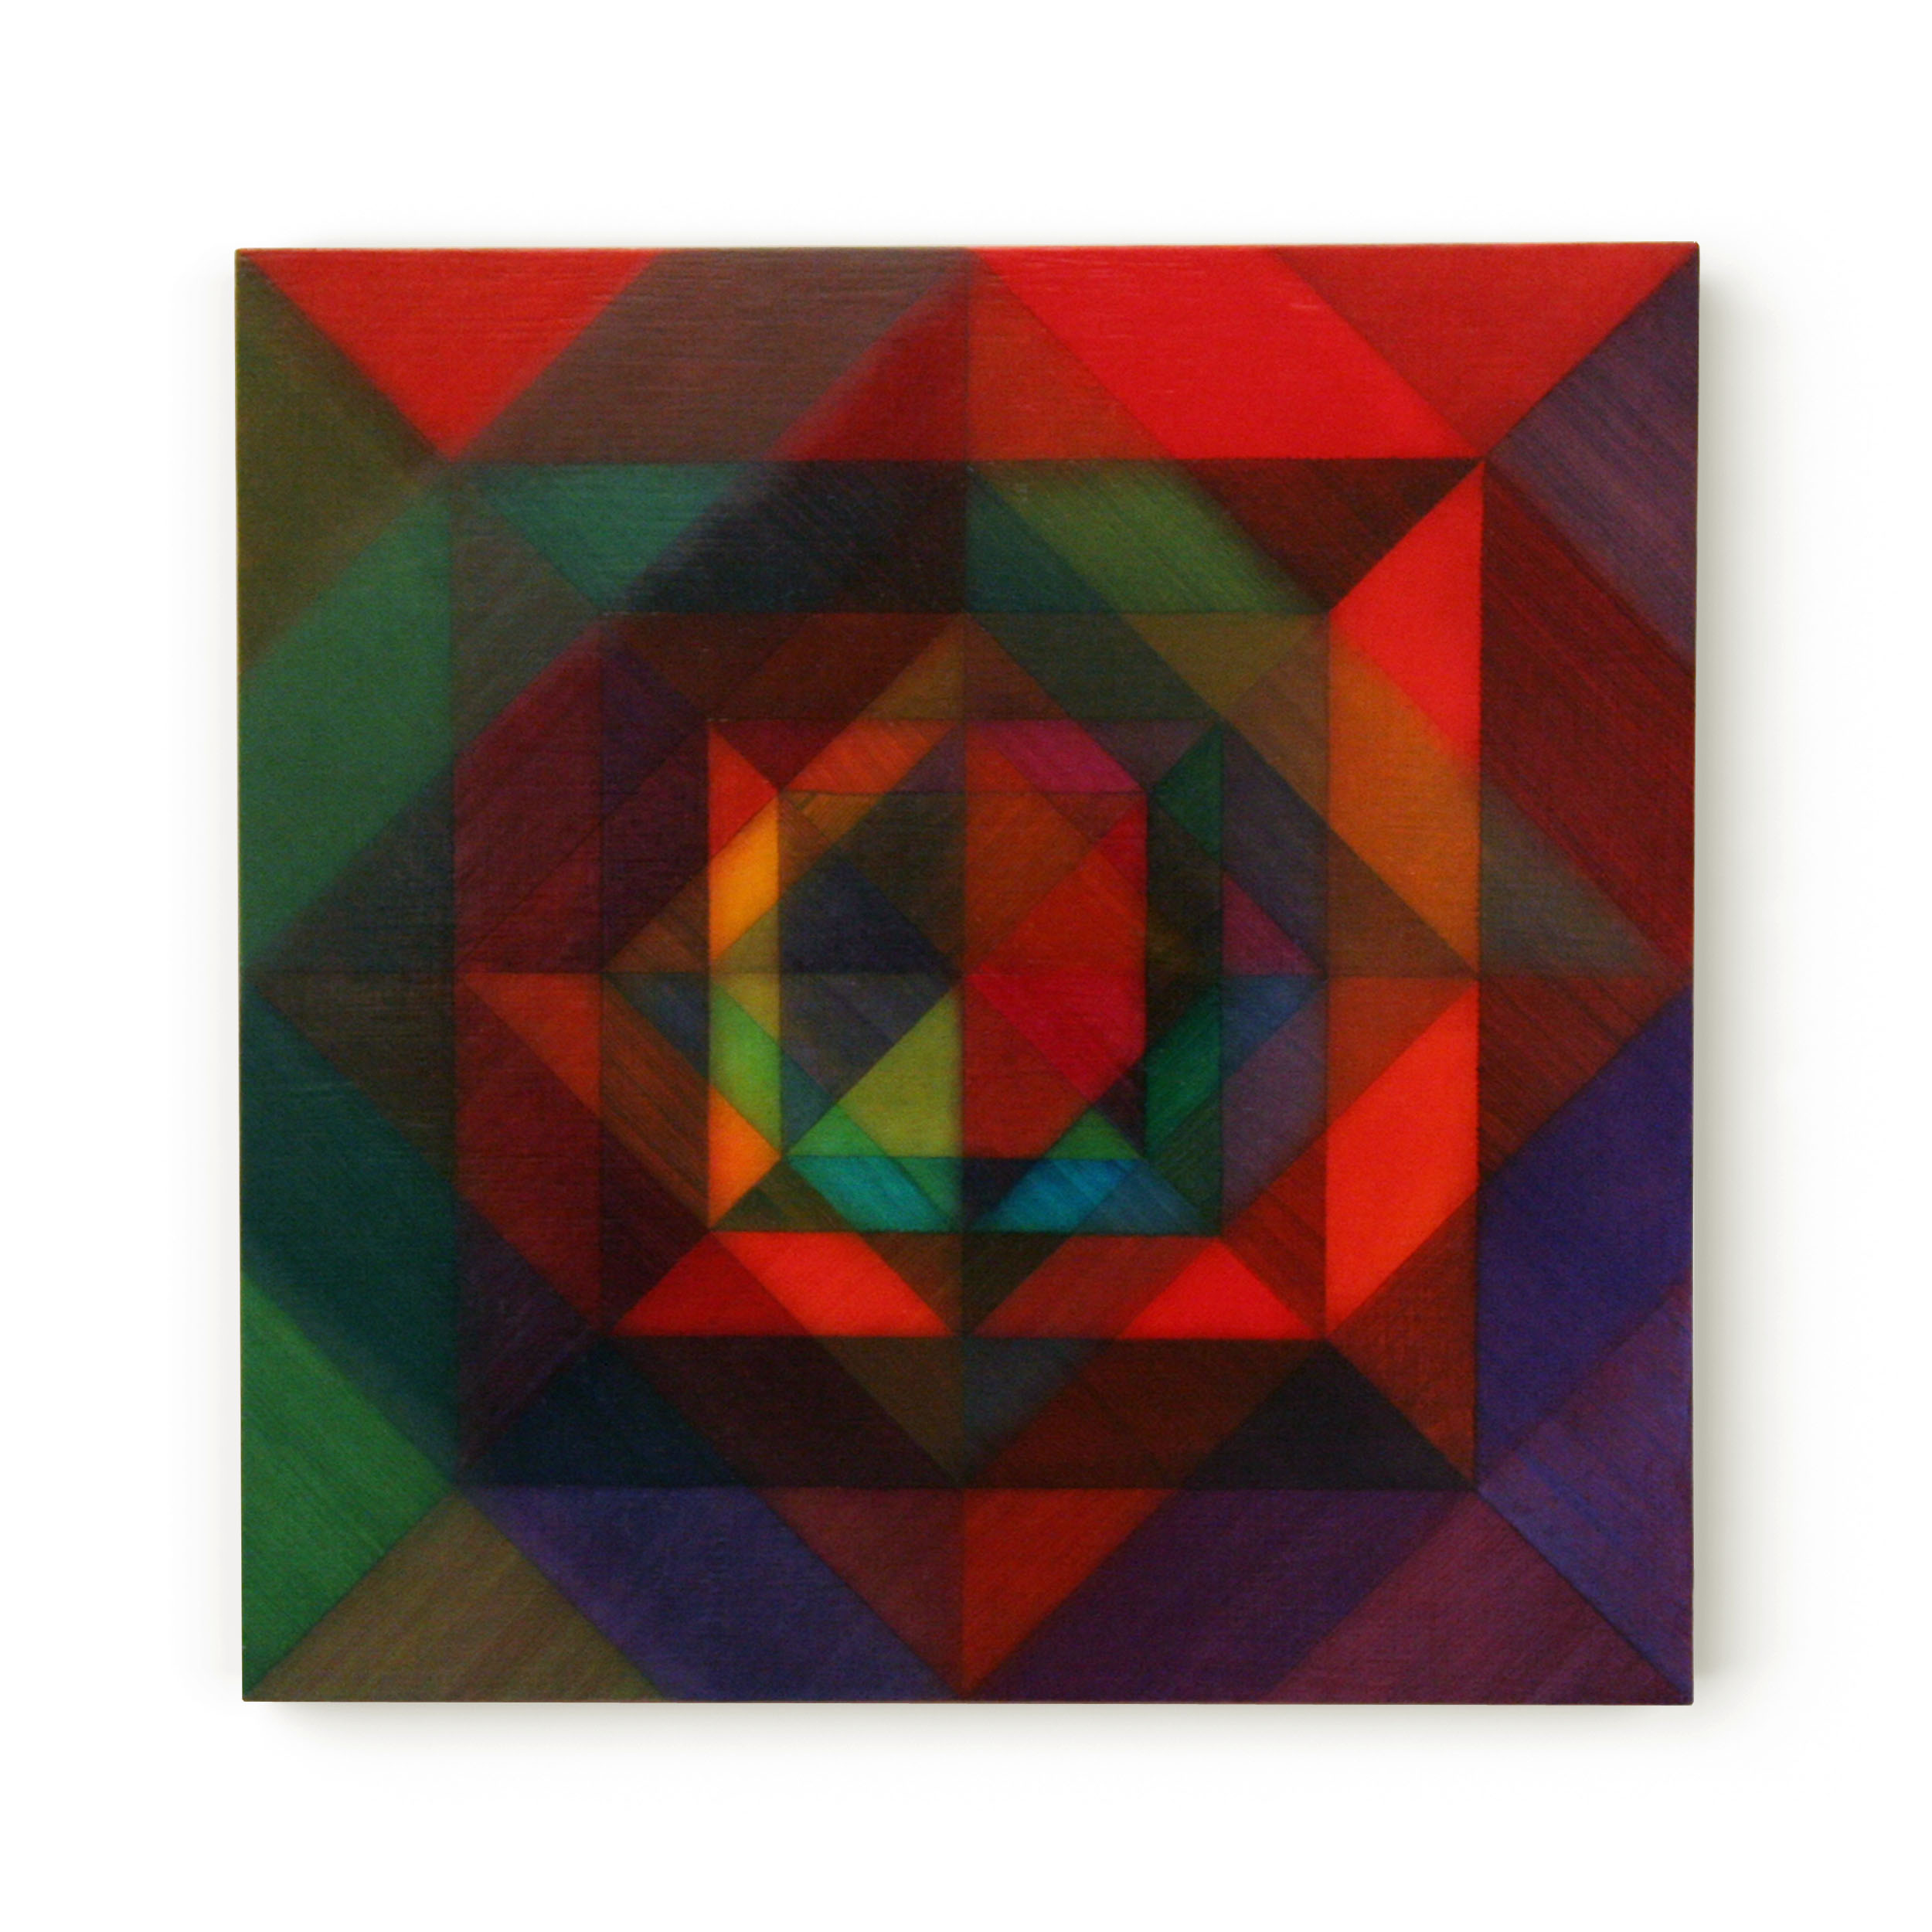   Beyond the Surface III    60 x 60 cms  